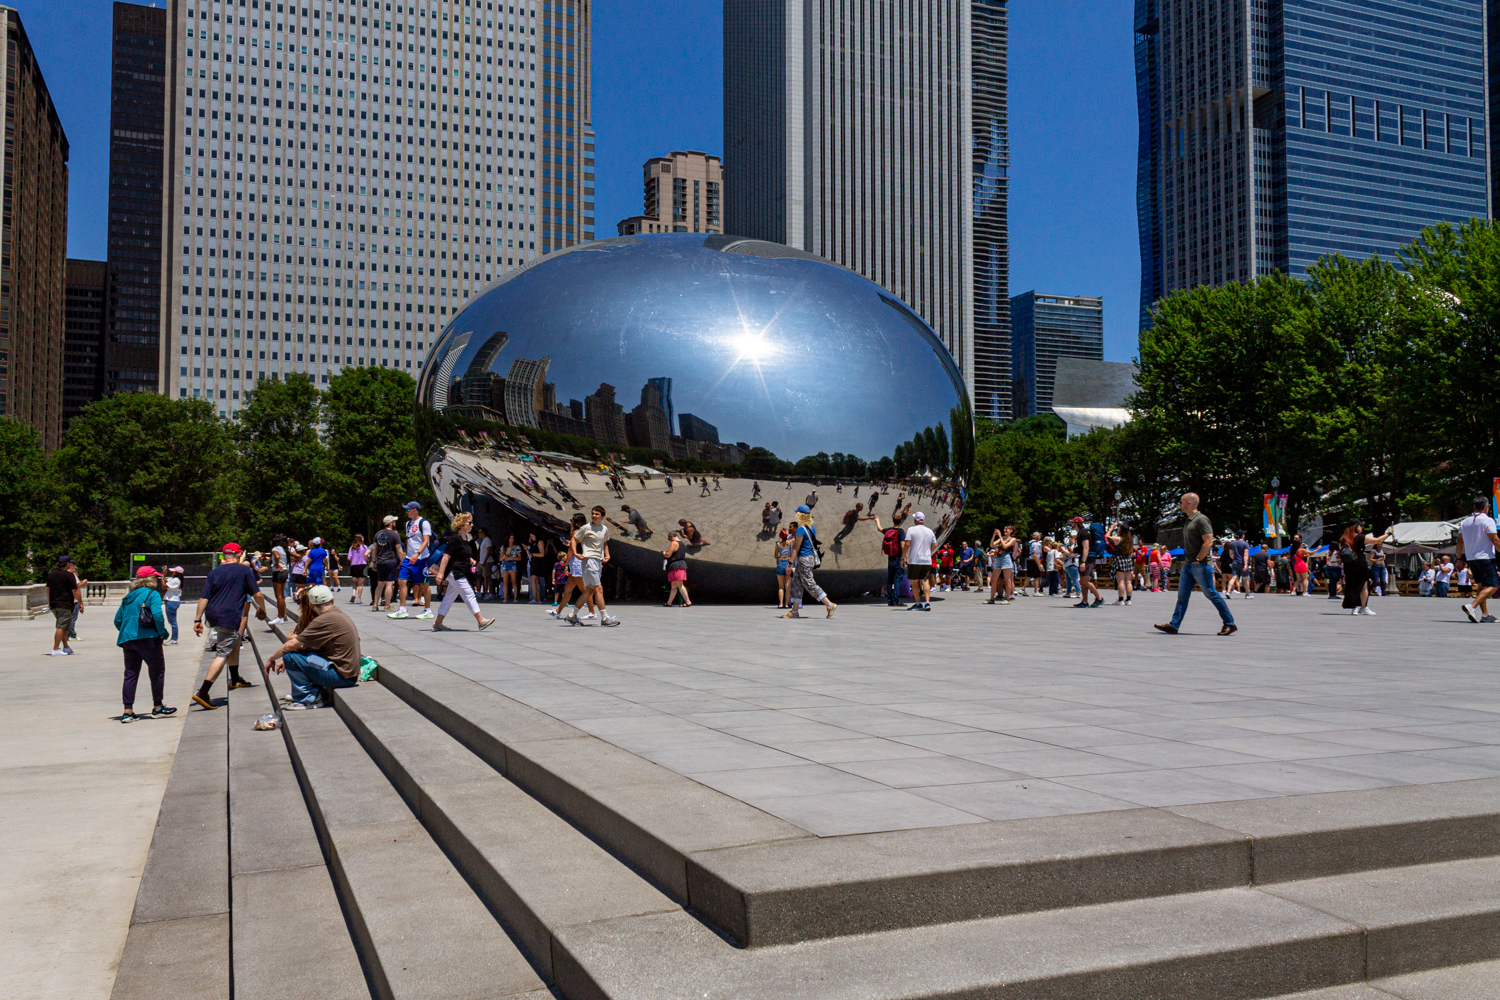 The Bean reopening